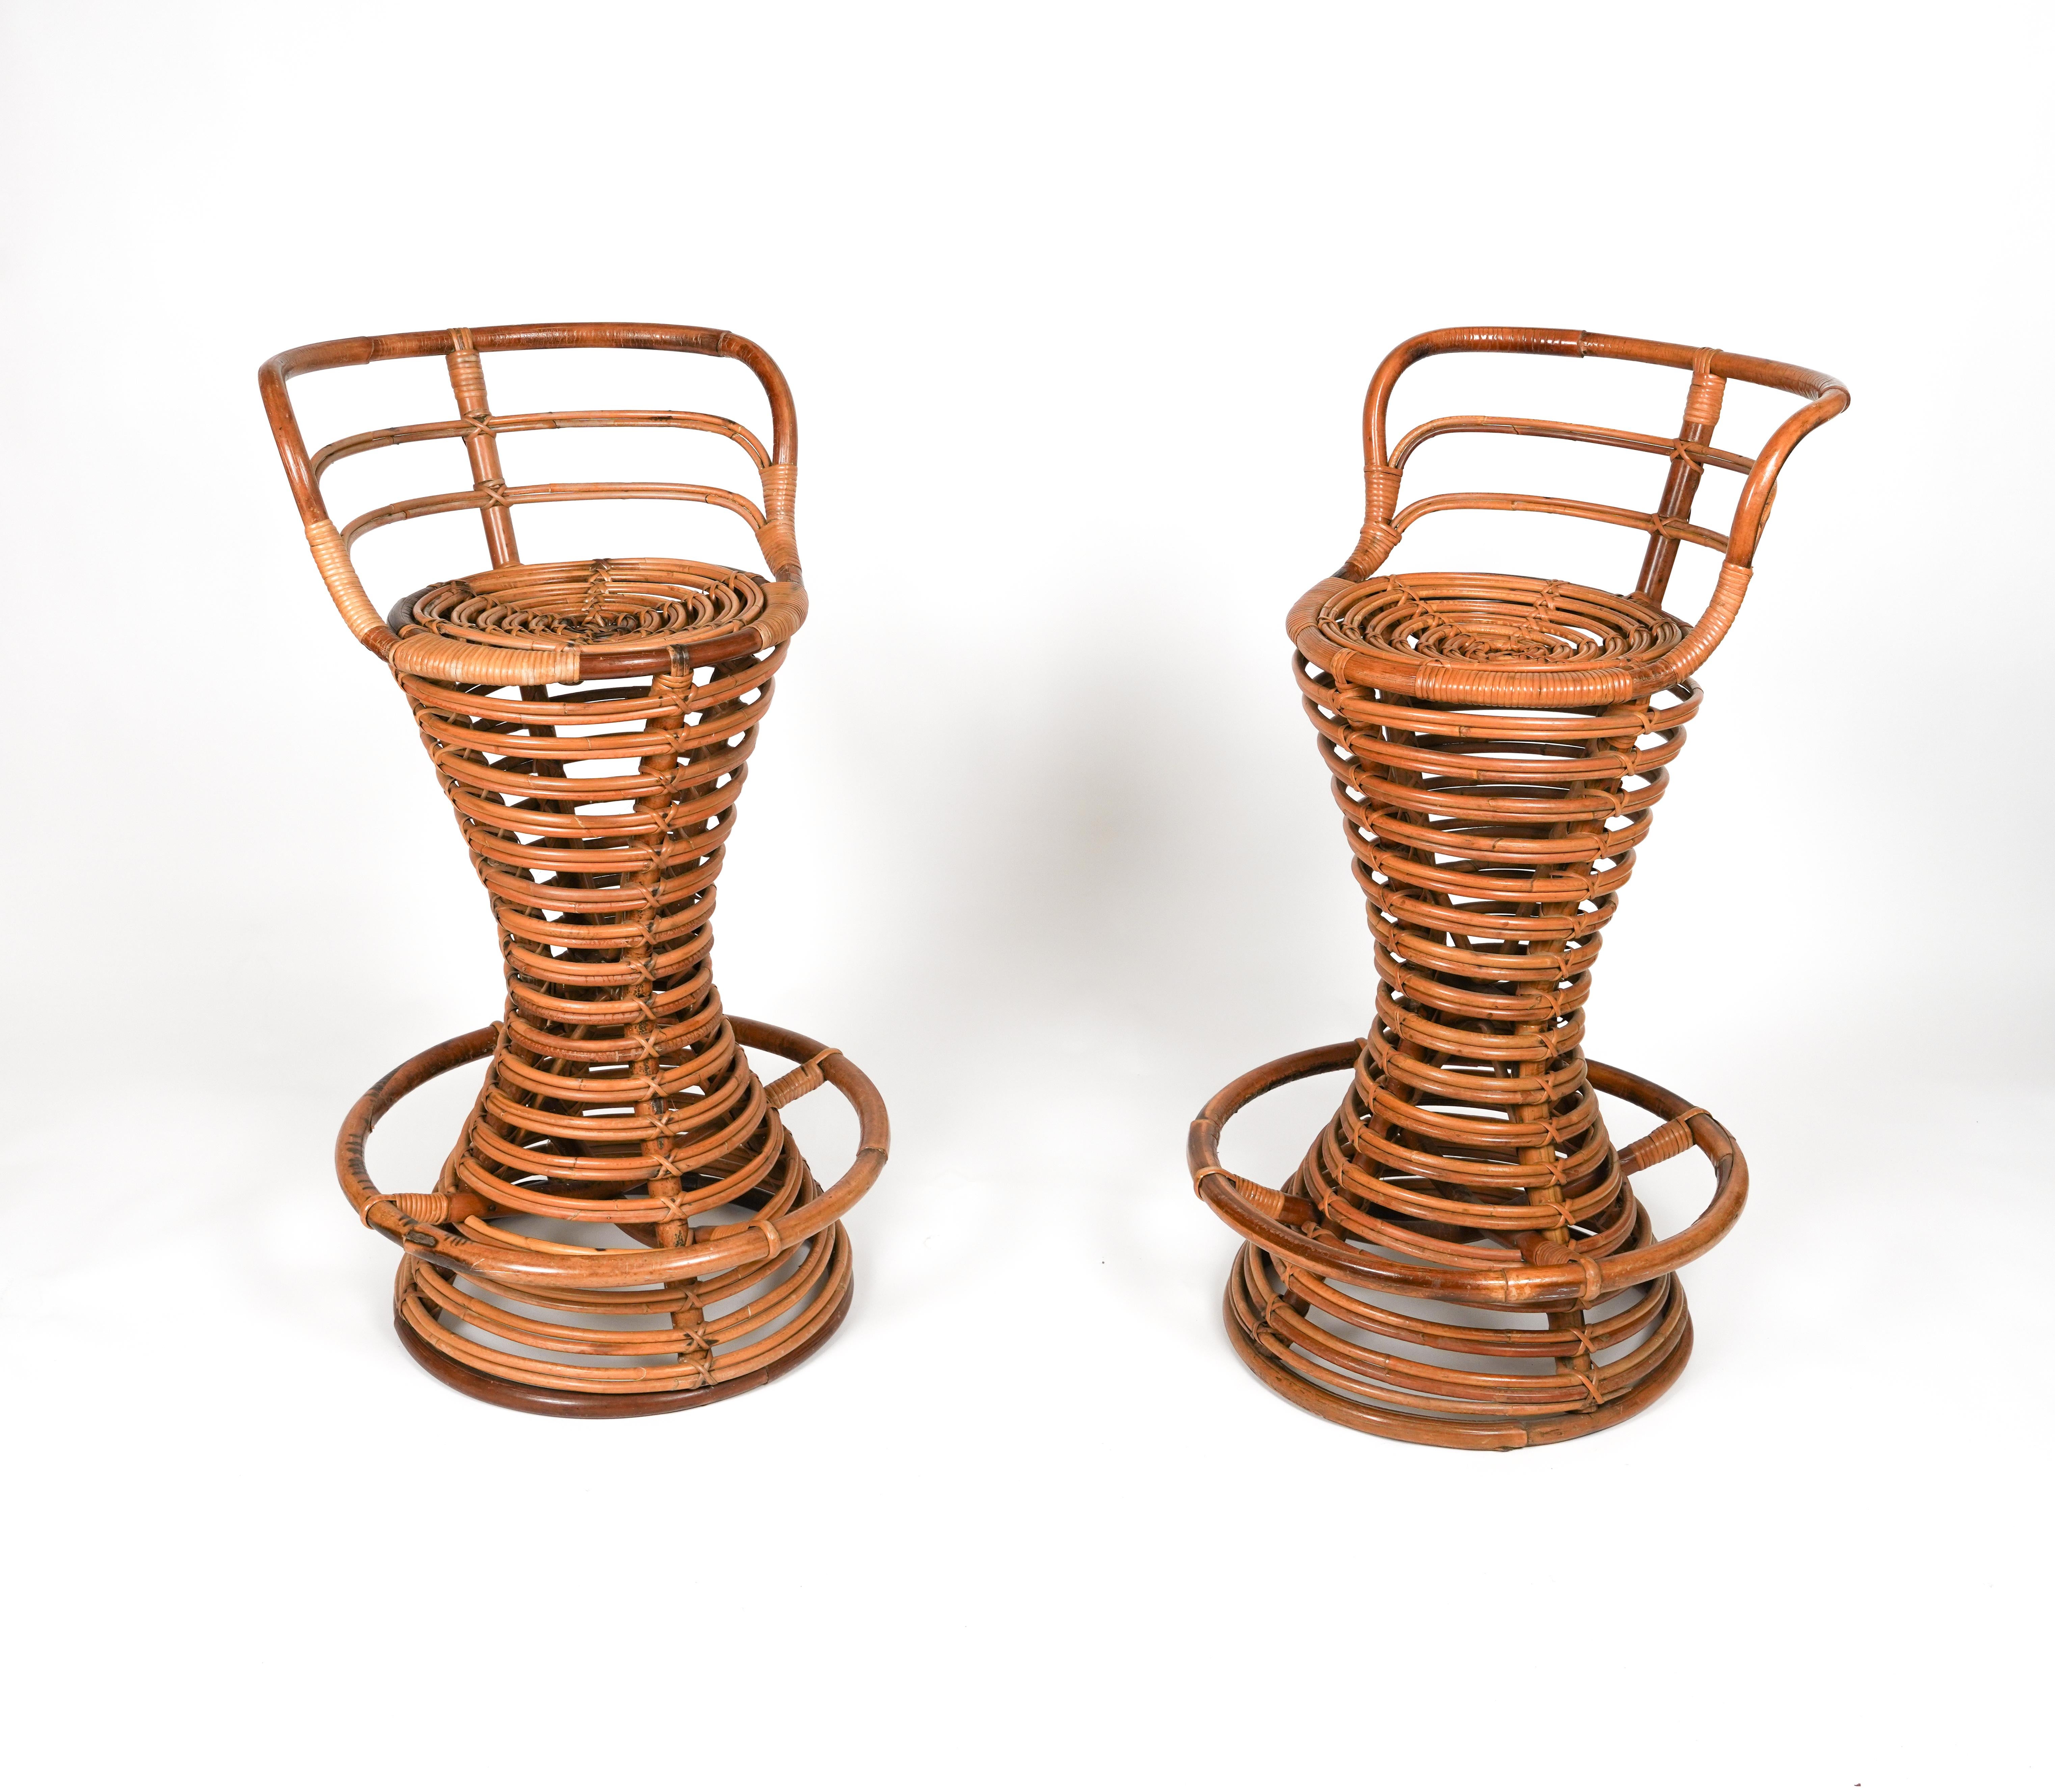 Italian Midcentury Rattan and Bamboo Pair of Bar Stools Tito Agnoli Style, Italy 1960s For Sale